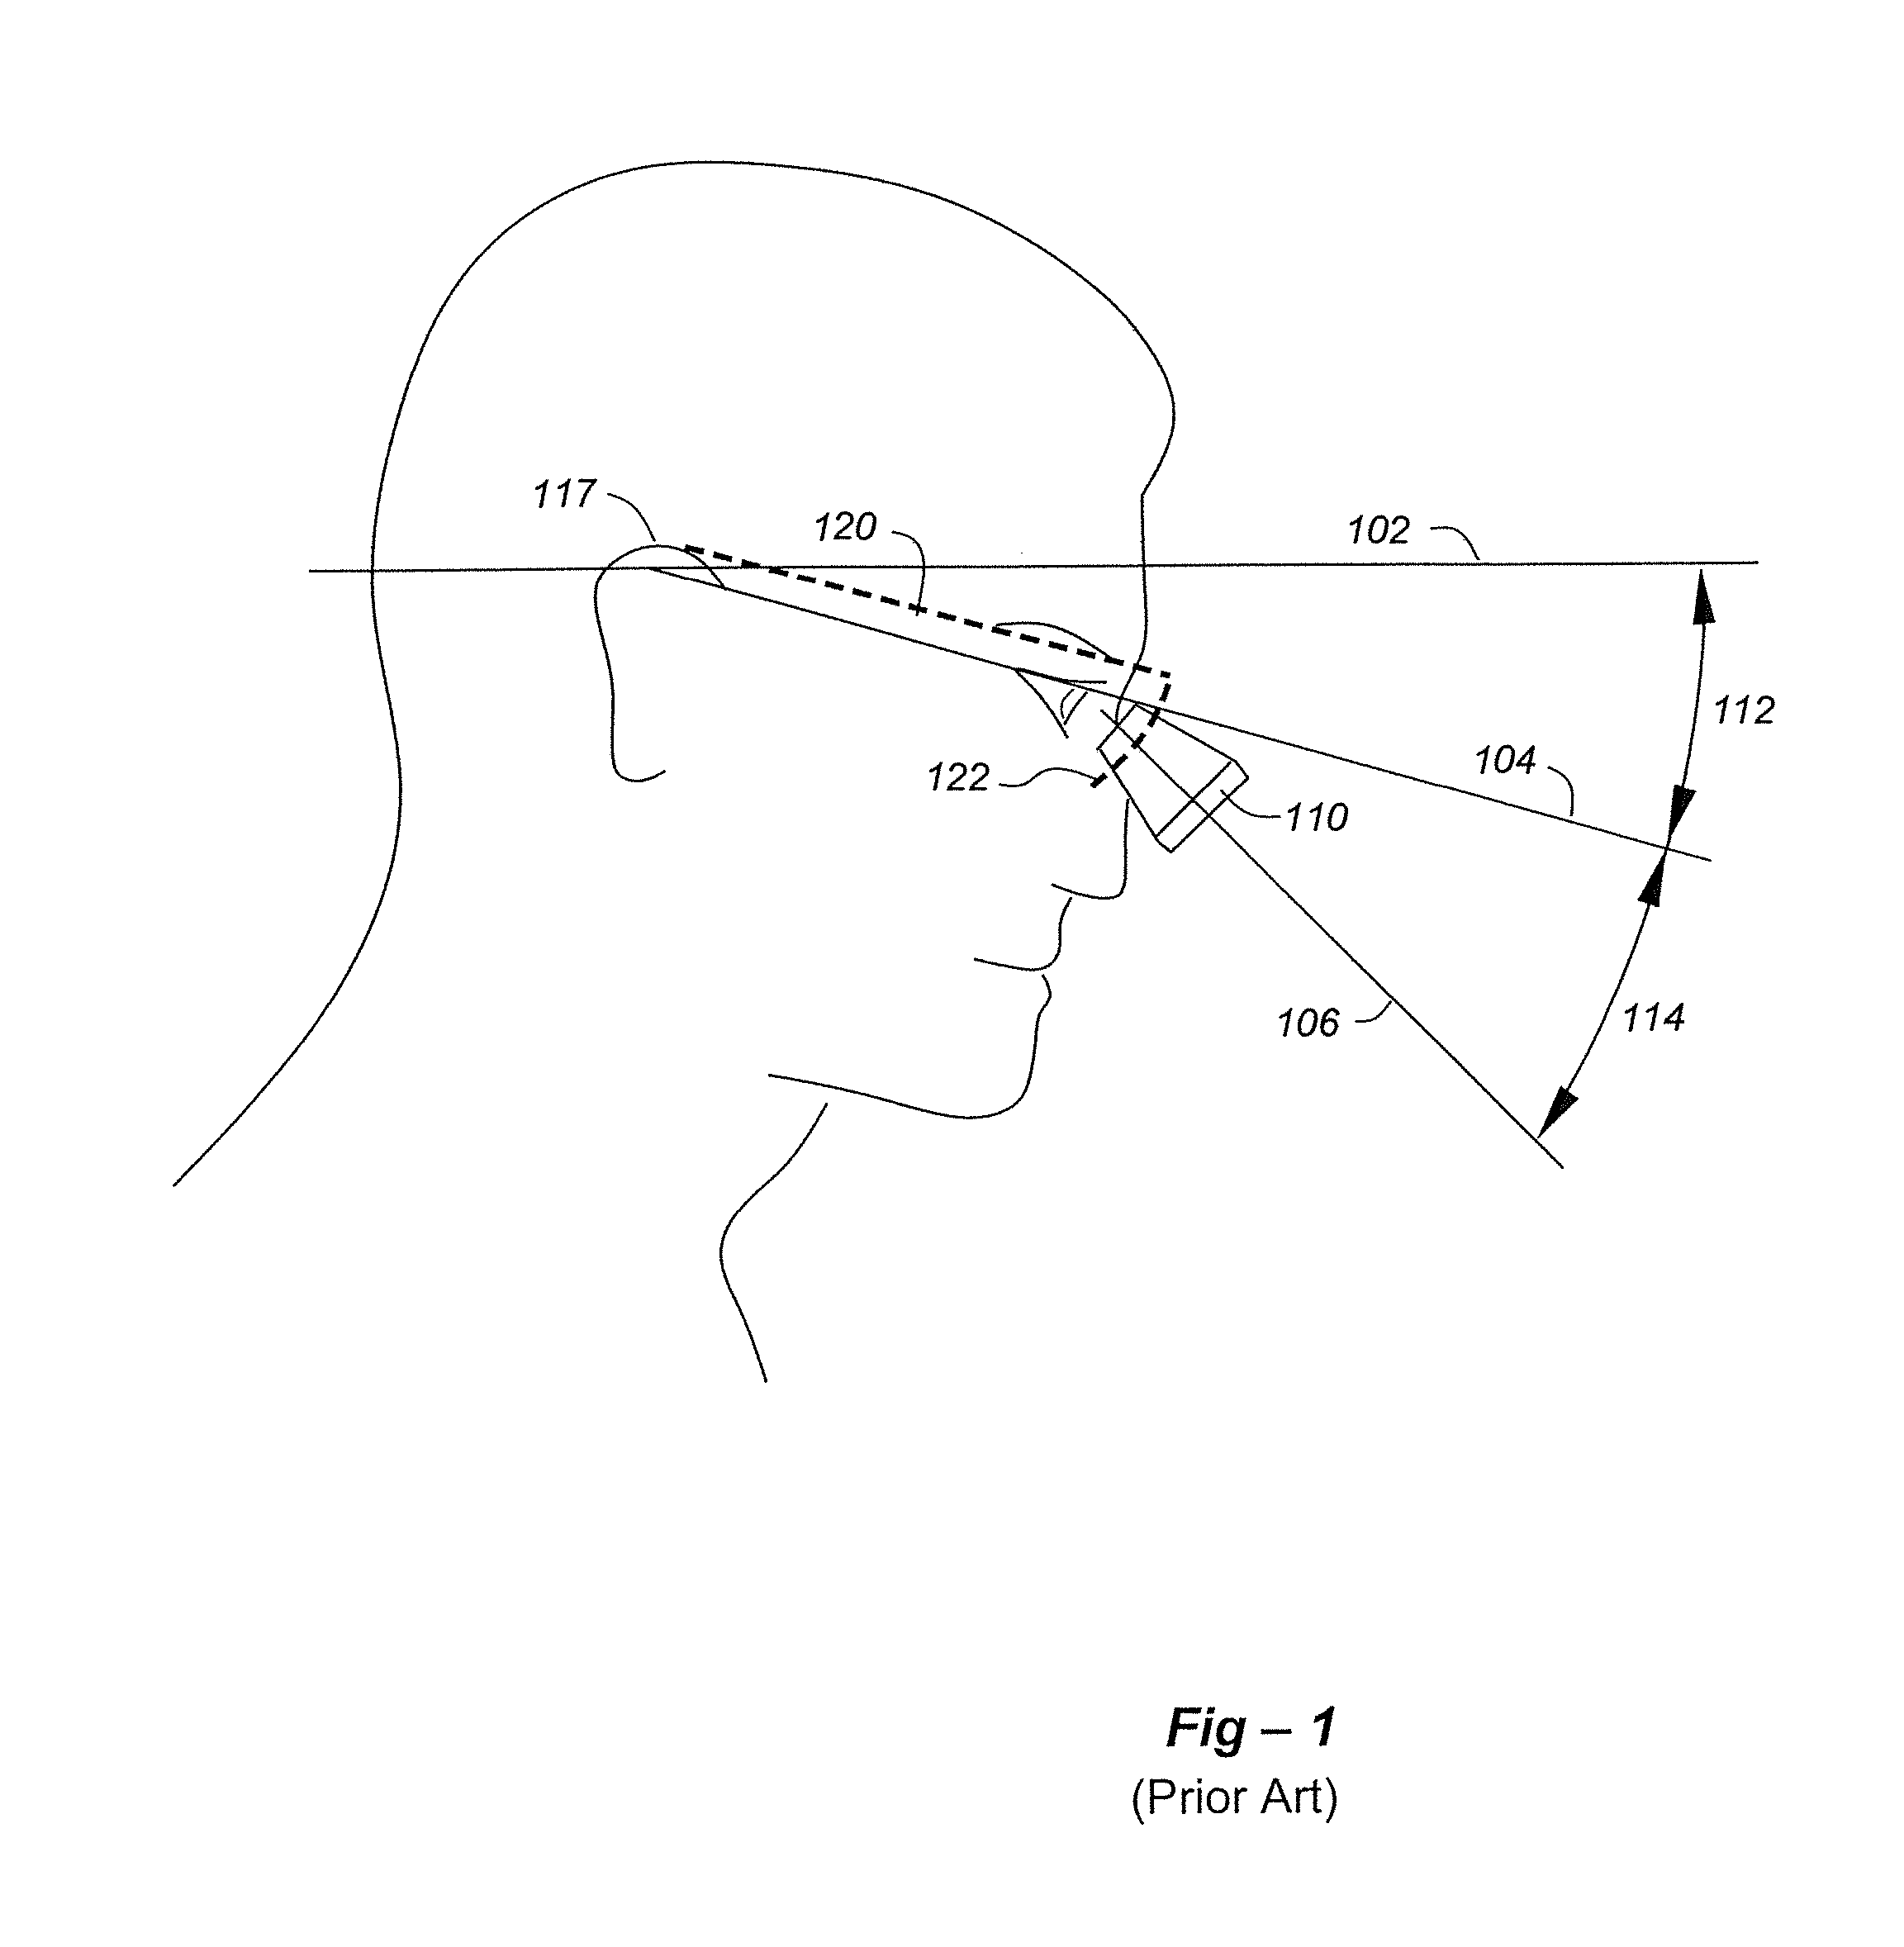 Through-the-lens (TTL) loupes with improved declination angle